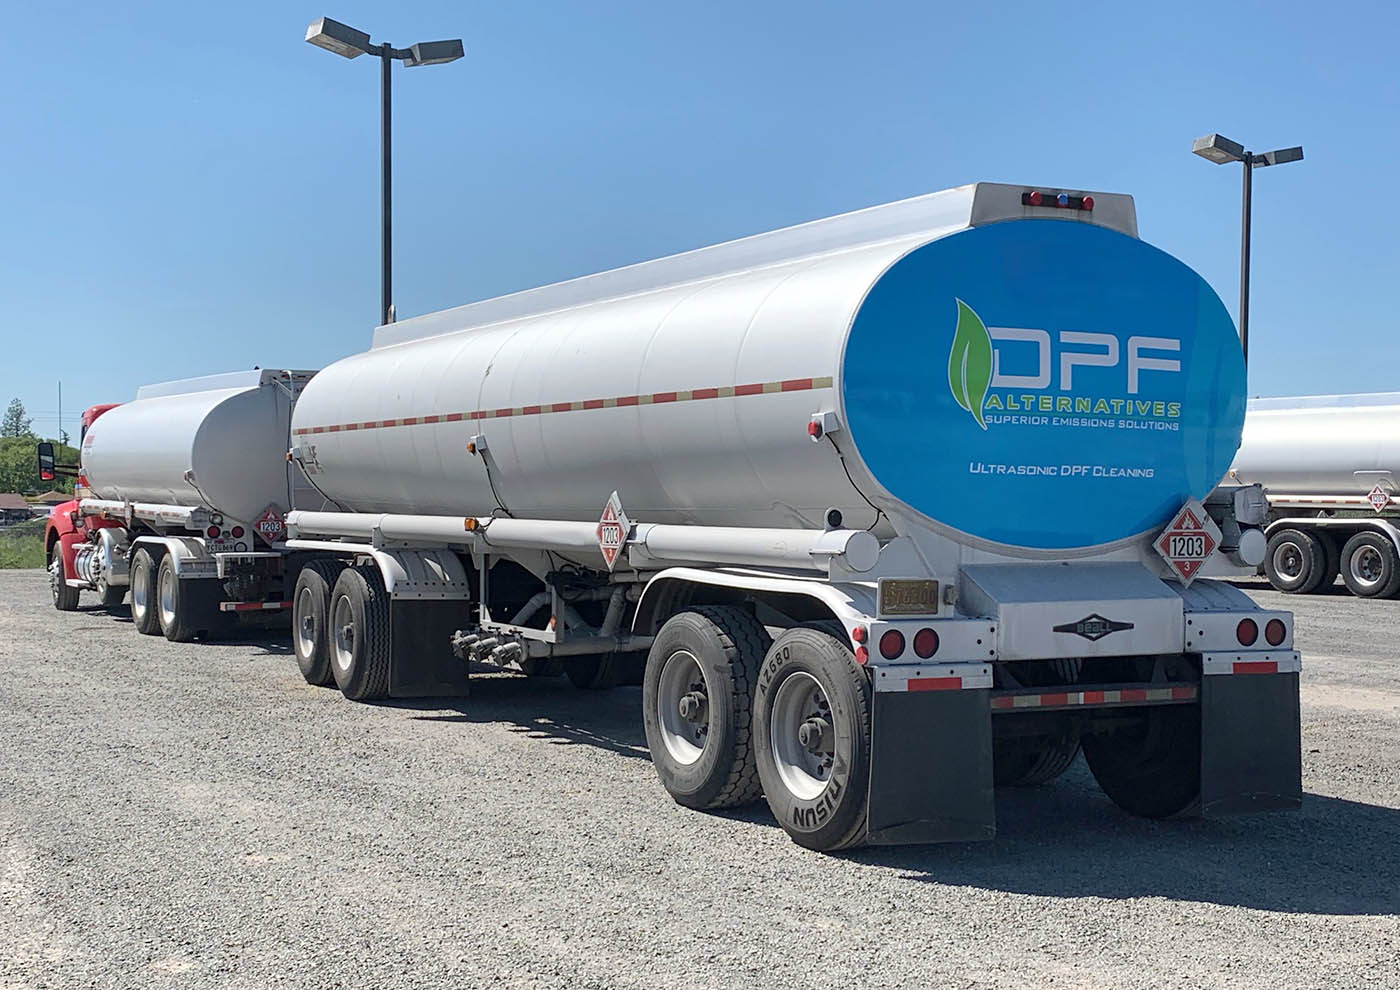 Back of a clean, large, reflective semi truck rig, contact DPF Alternatives for a DPF cleaner in Phoenix.